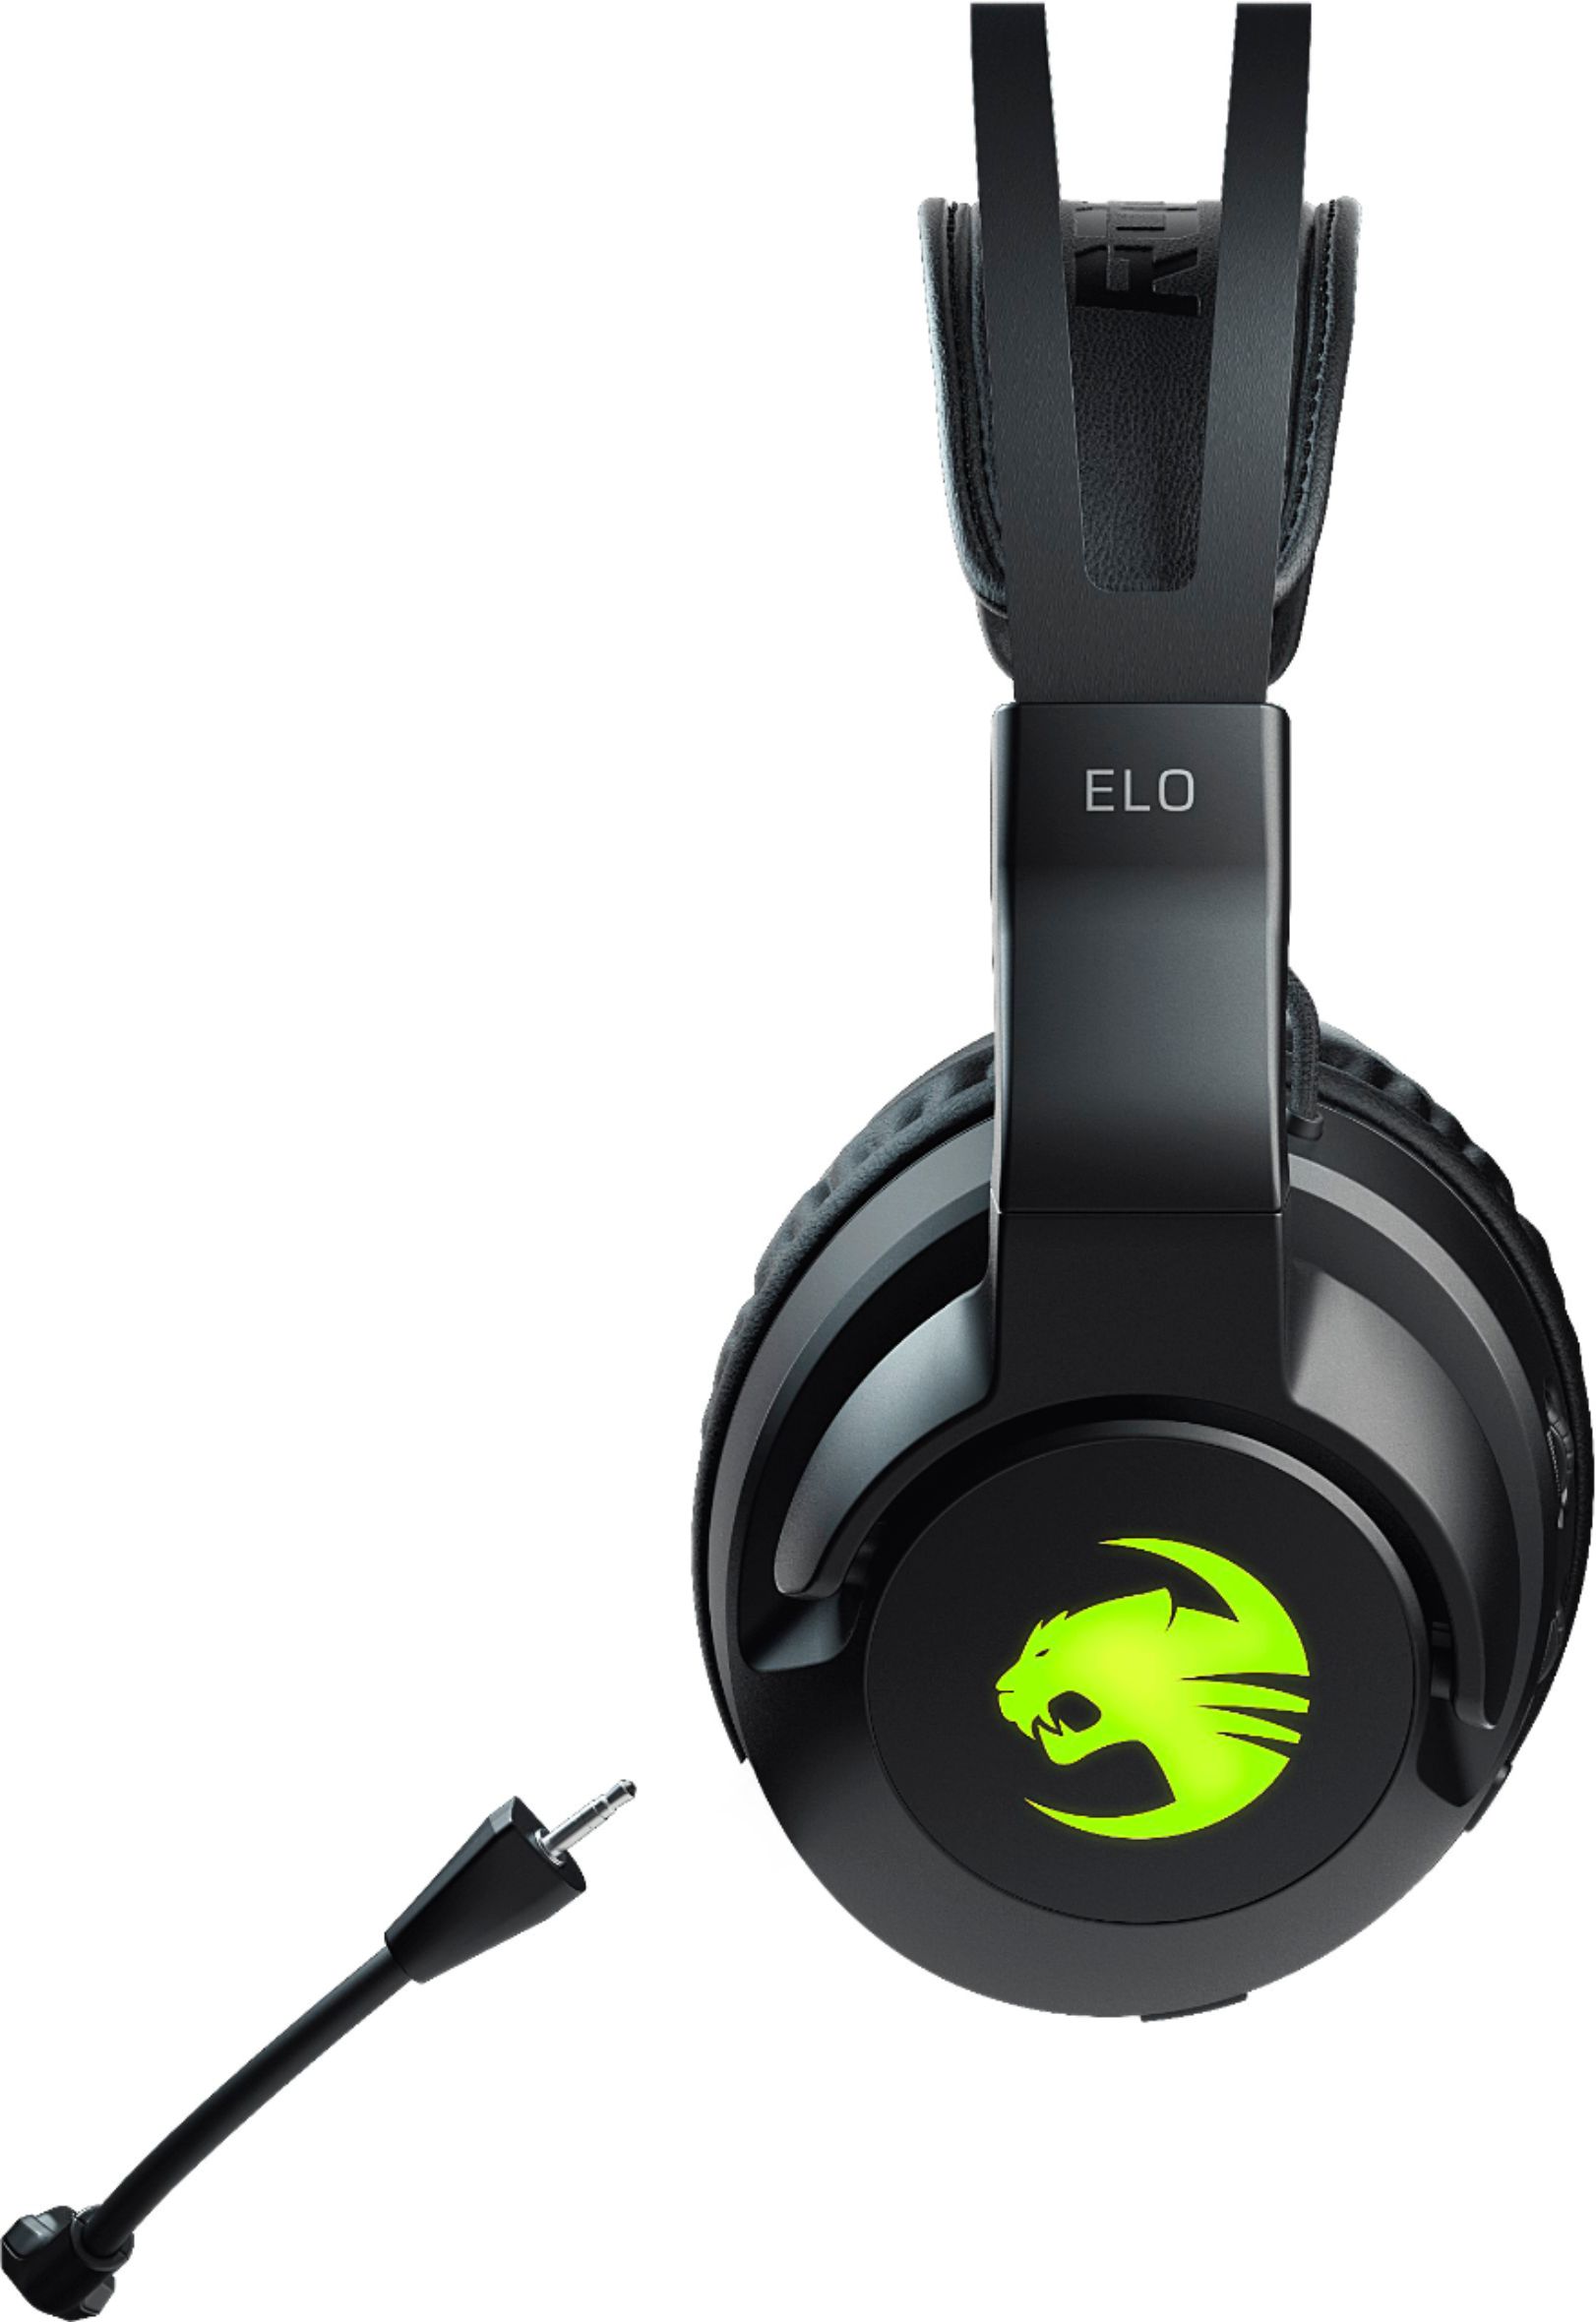 Angle View: ROCCAT - Elo 7.1 Air Wireless Gaming Headset for PC - Black